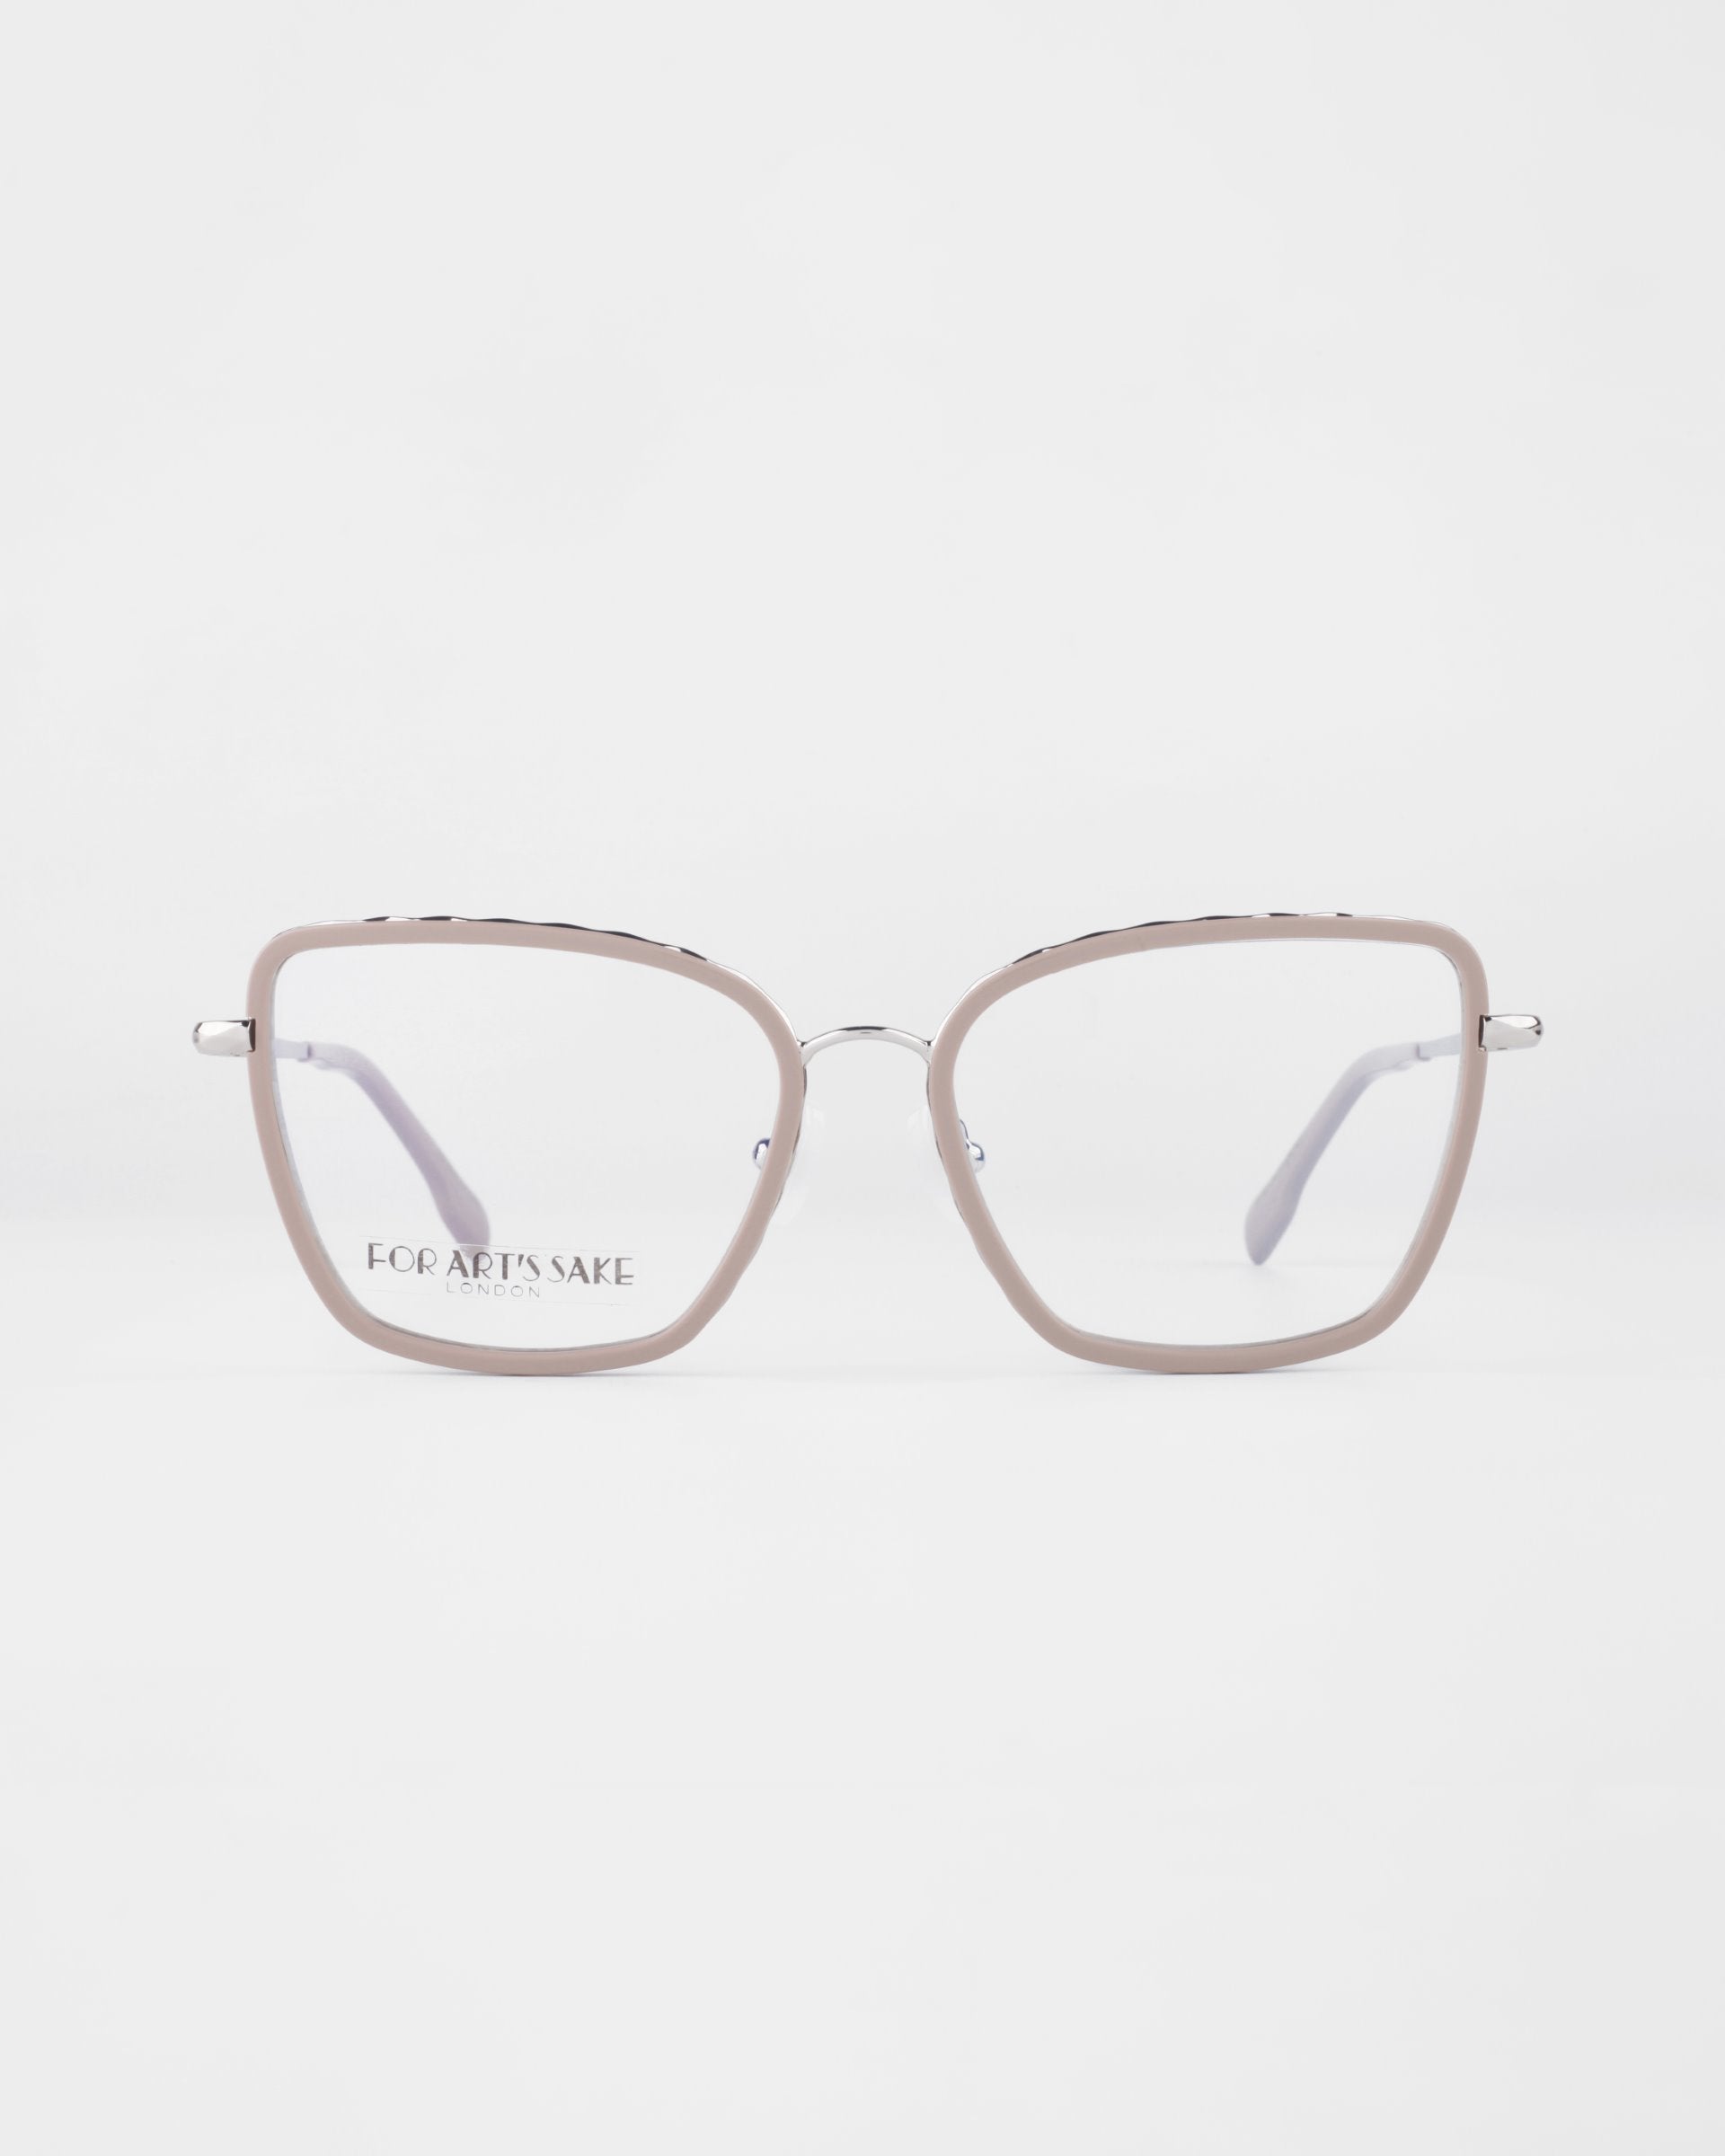 A pair of square-framed eyeglasses with thin, light pink rims and clear prescription lenses. The temple arms are silver with white end tips. The words &quot;For Art&#39;s Sake®&quot; are faintly visible on one of the lenses. The background is plain white. The product name is Lace from For Art&#39;s Sake®.